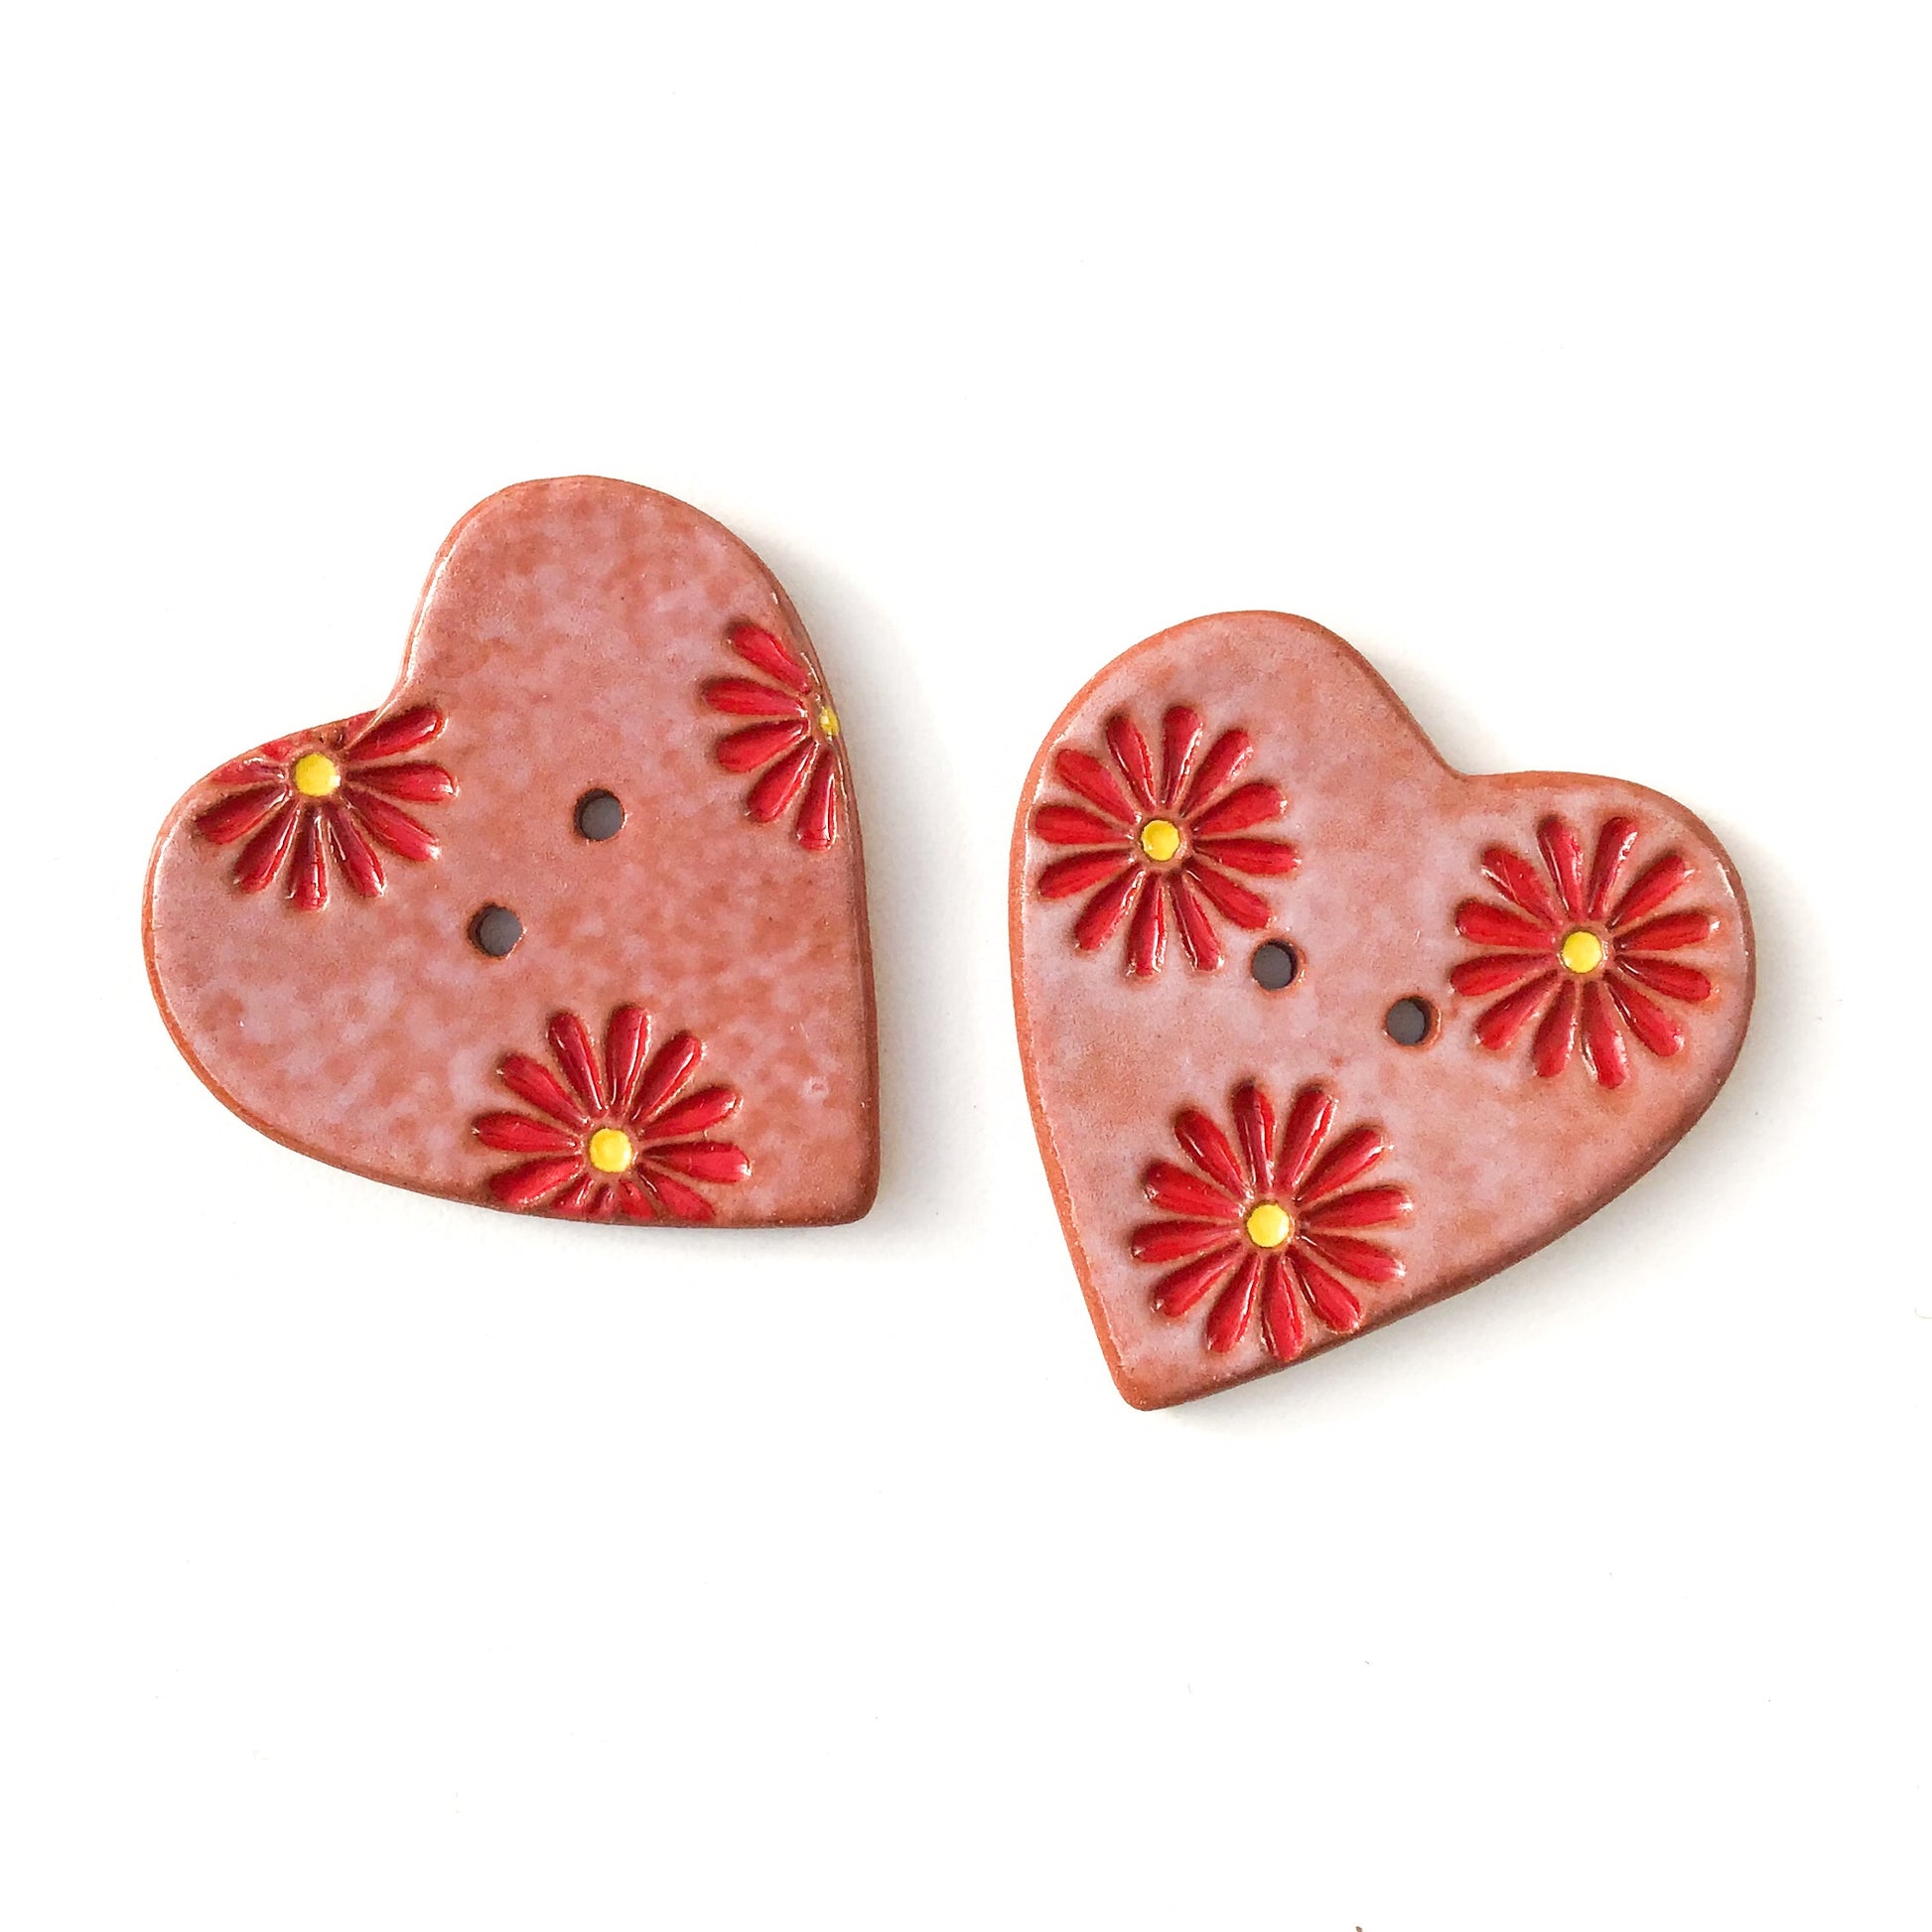 Decorative Heart Buttons - Ceramic Heart Button - Red Daisies - 1 3/8